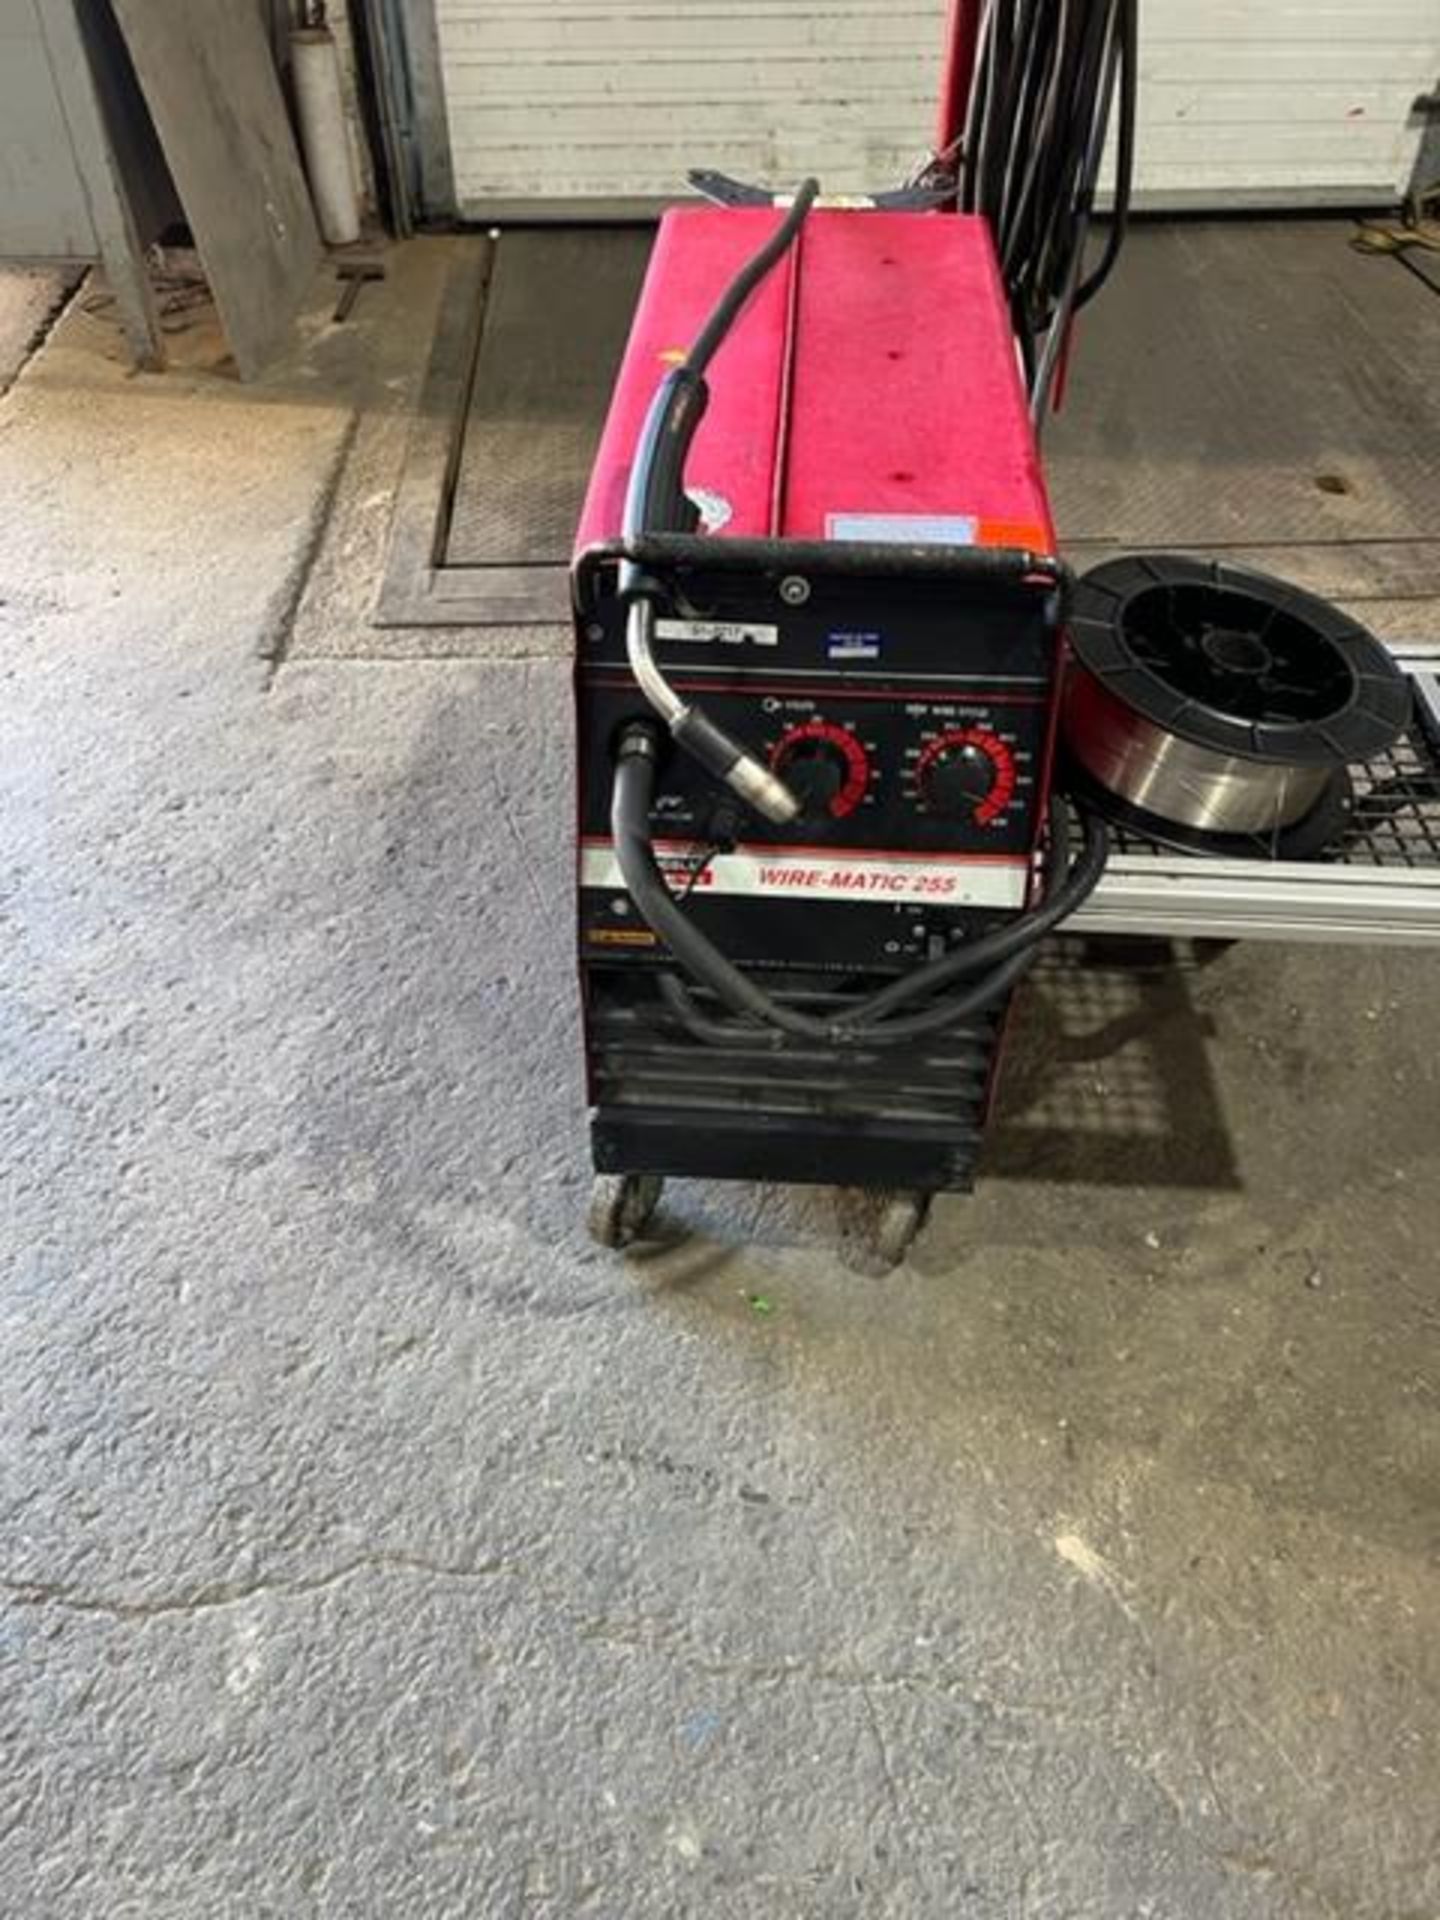 Lincoln Wirematic 255 Mig Welder with built in feeder 230/480/575V Complete with gun and cables - Image 2 of 4